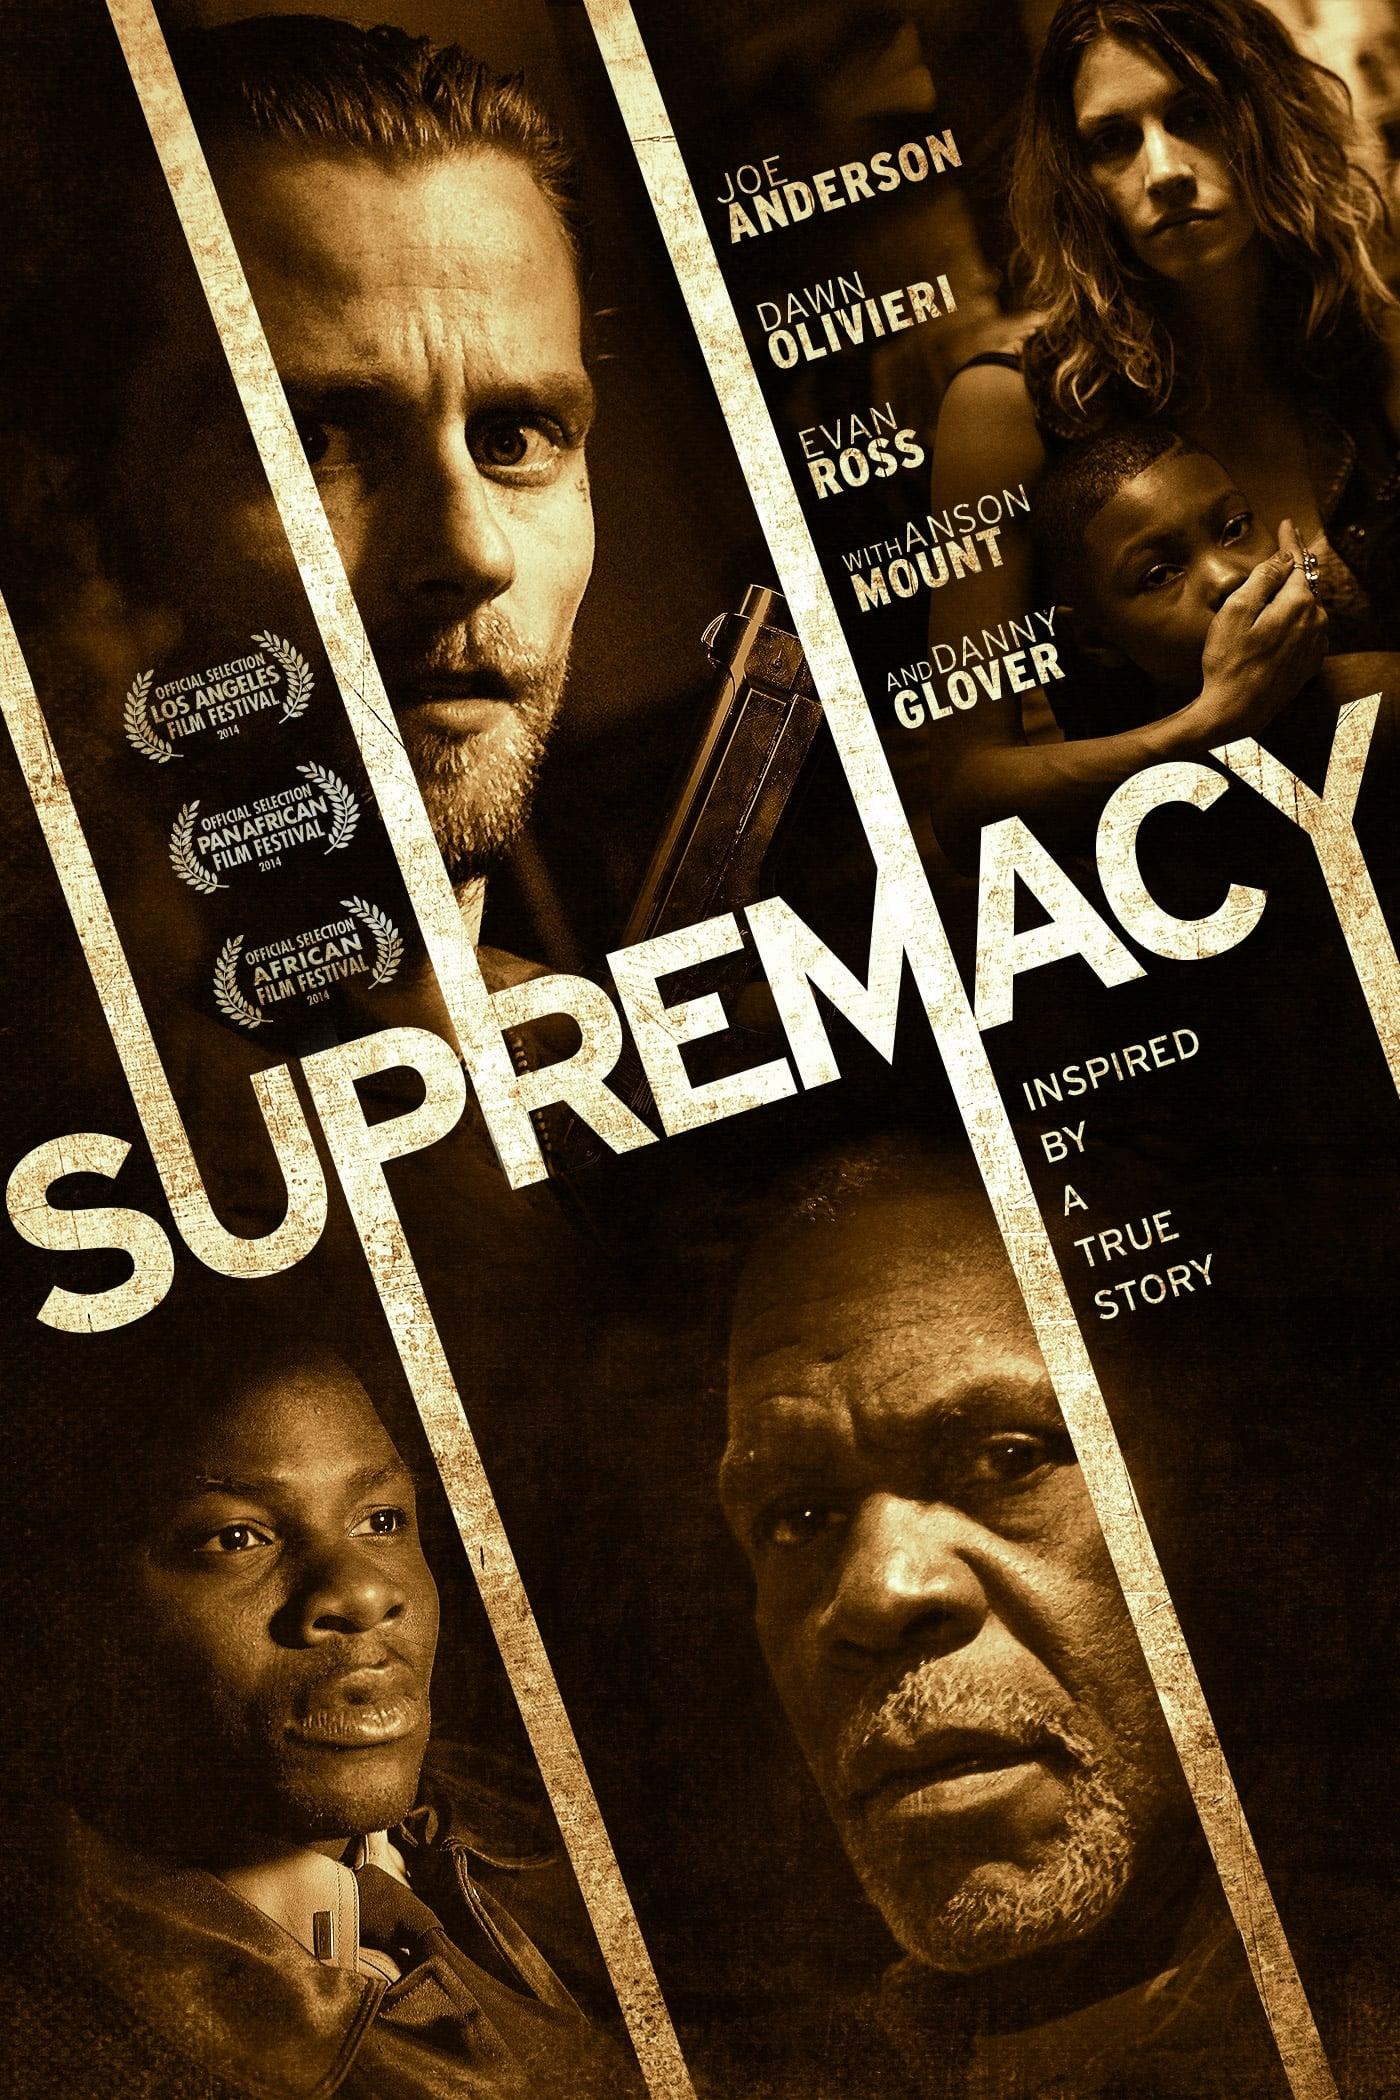 Supremacy poster